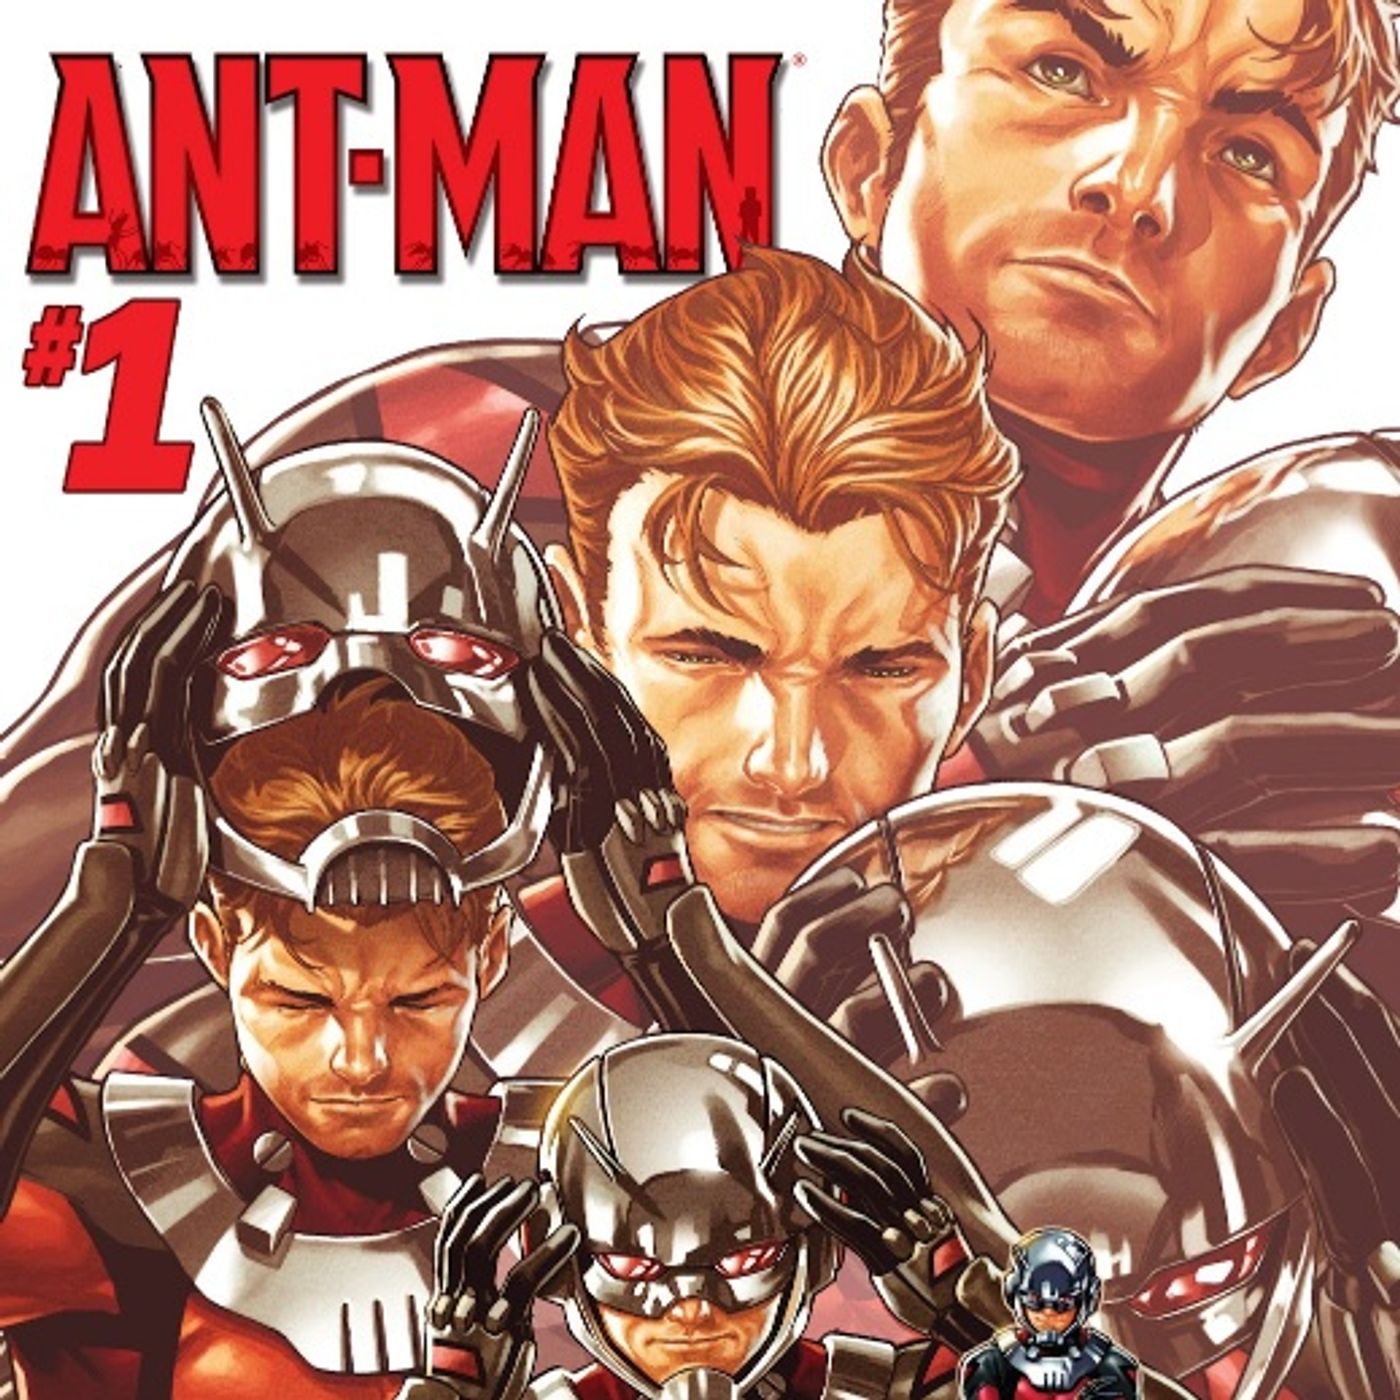 Syndicated Source Material #173 - Ant-Man “Second Chance Man” (Marvel, 2015)